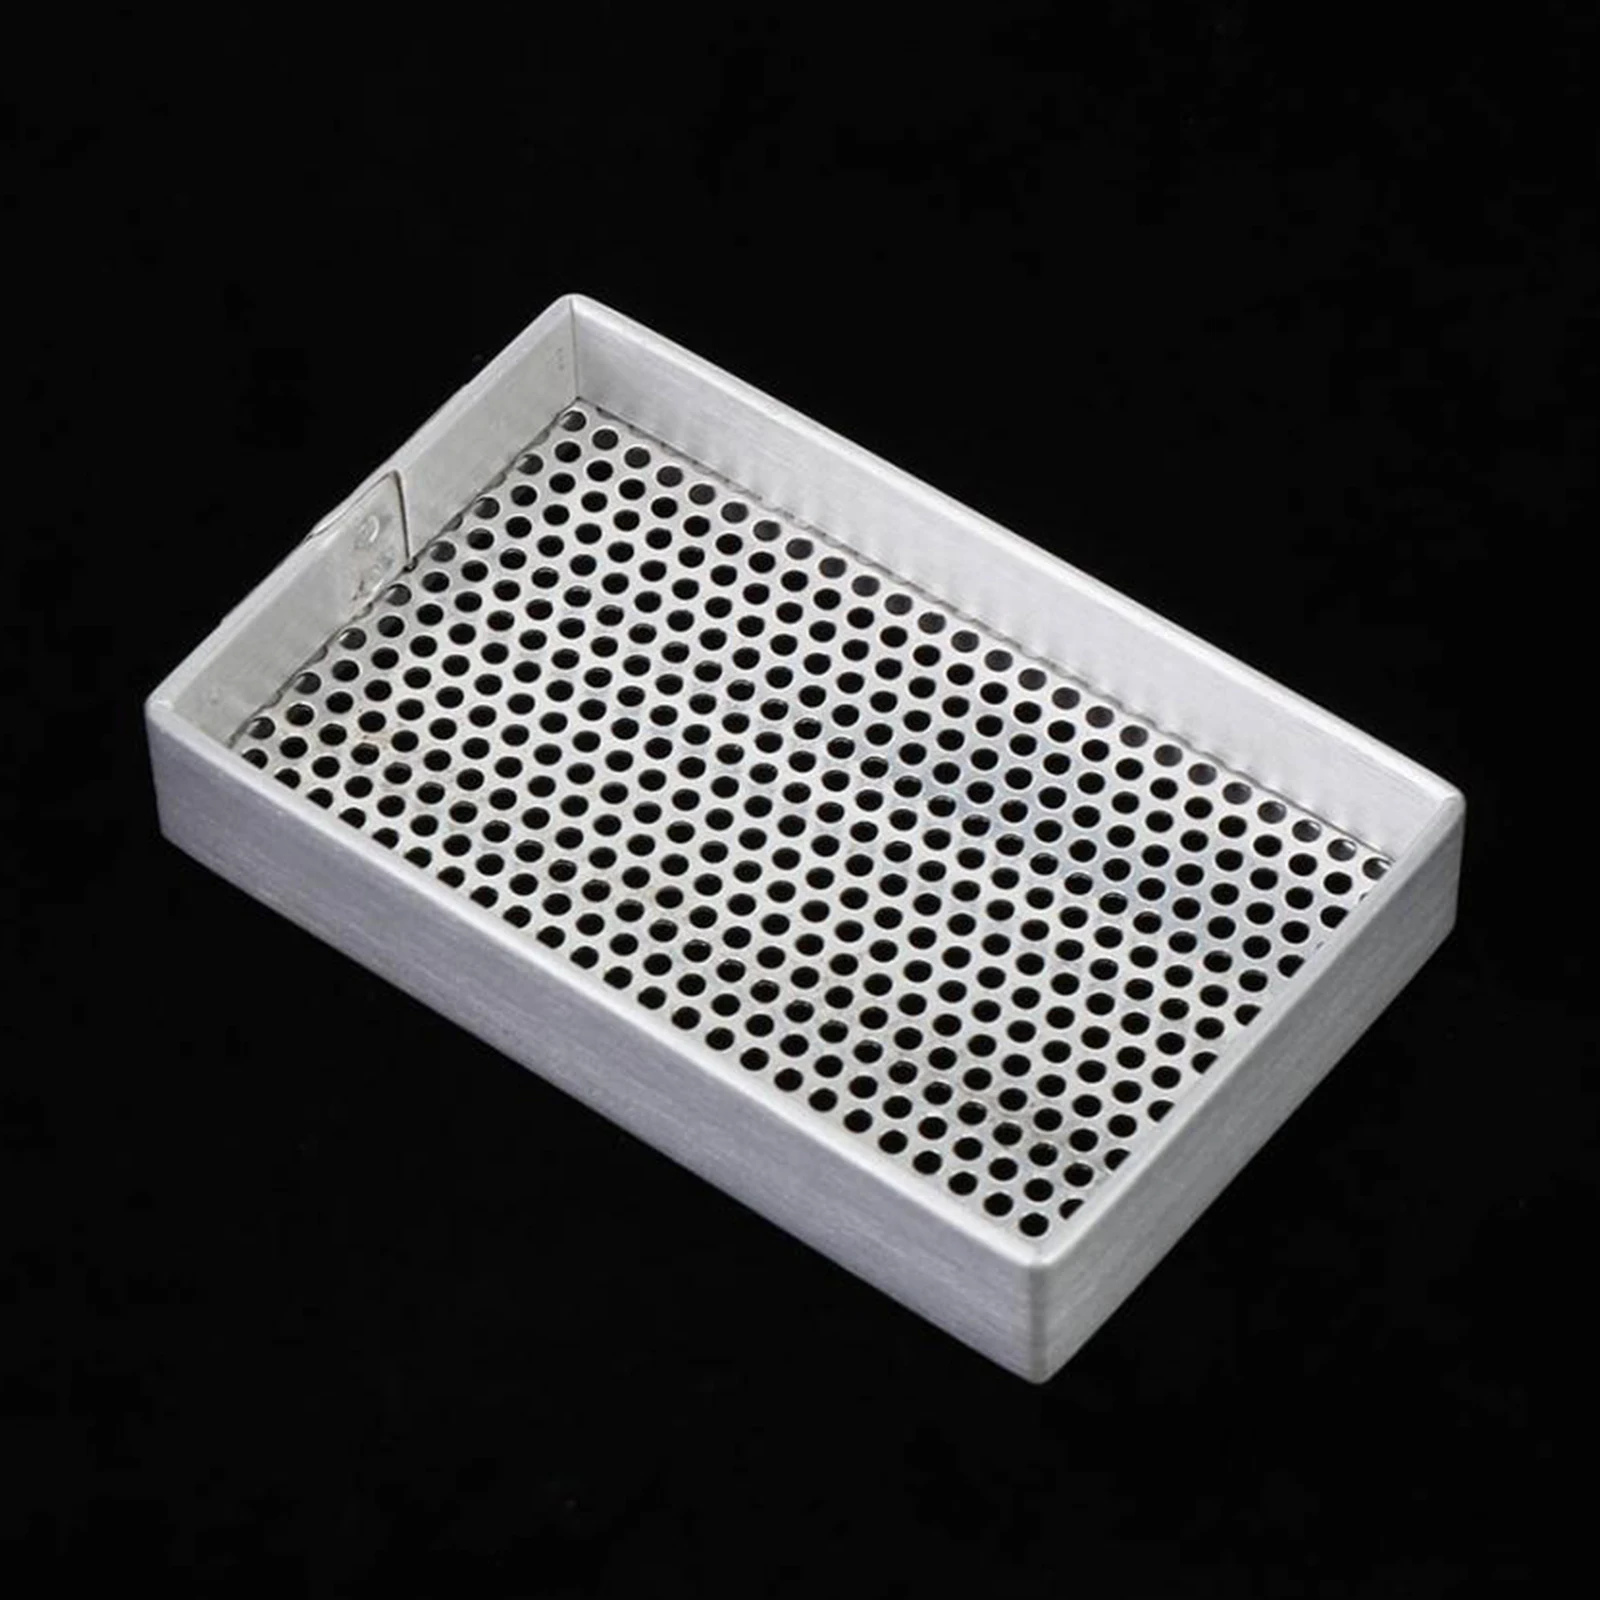 Watch Parts Aluminum Drying Storage Tray Organizer Dryer Plate Cleaning Tool